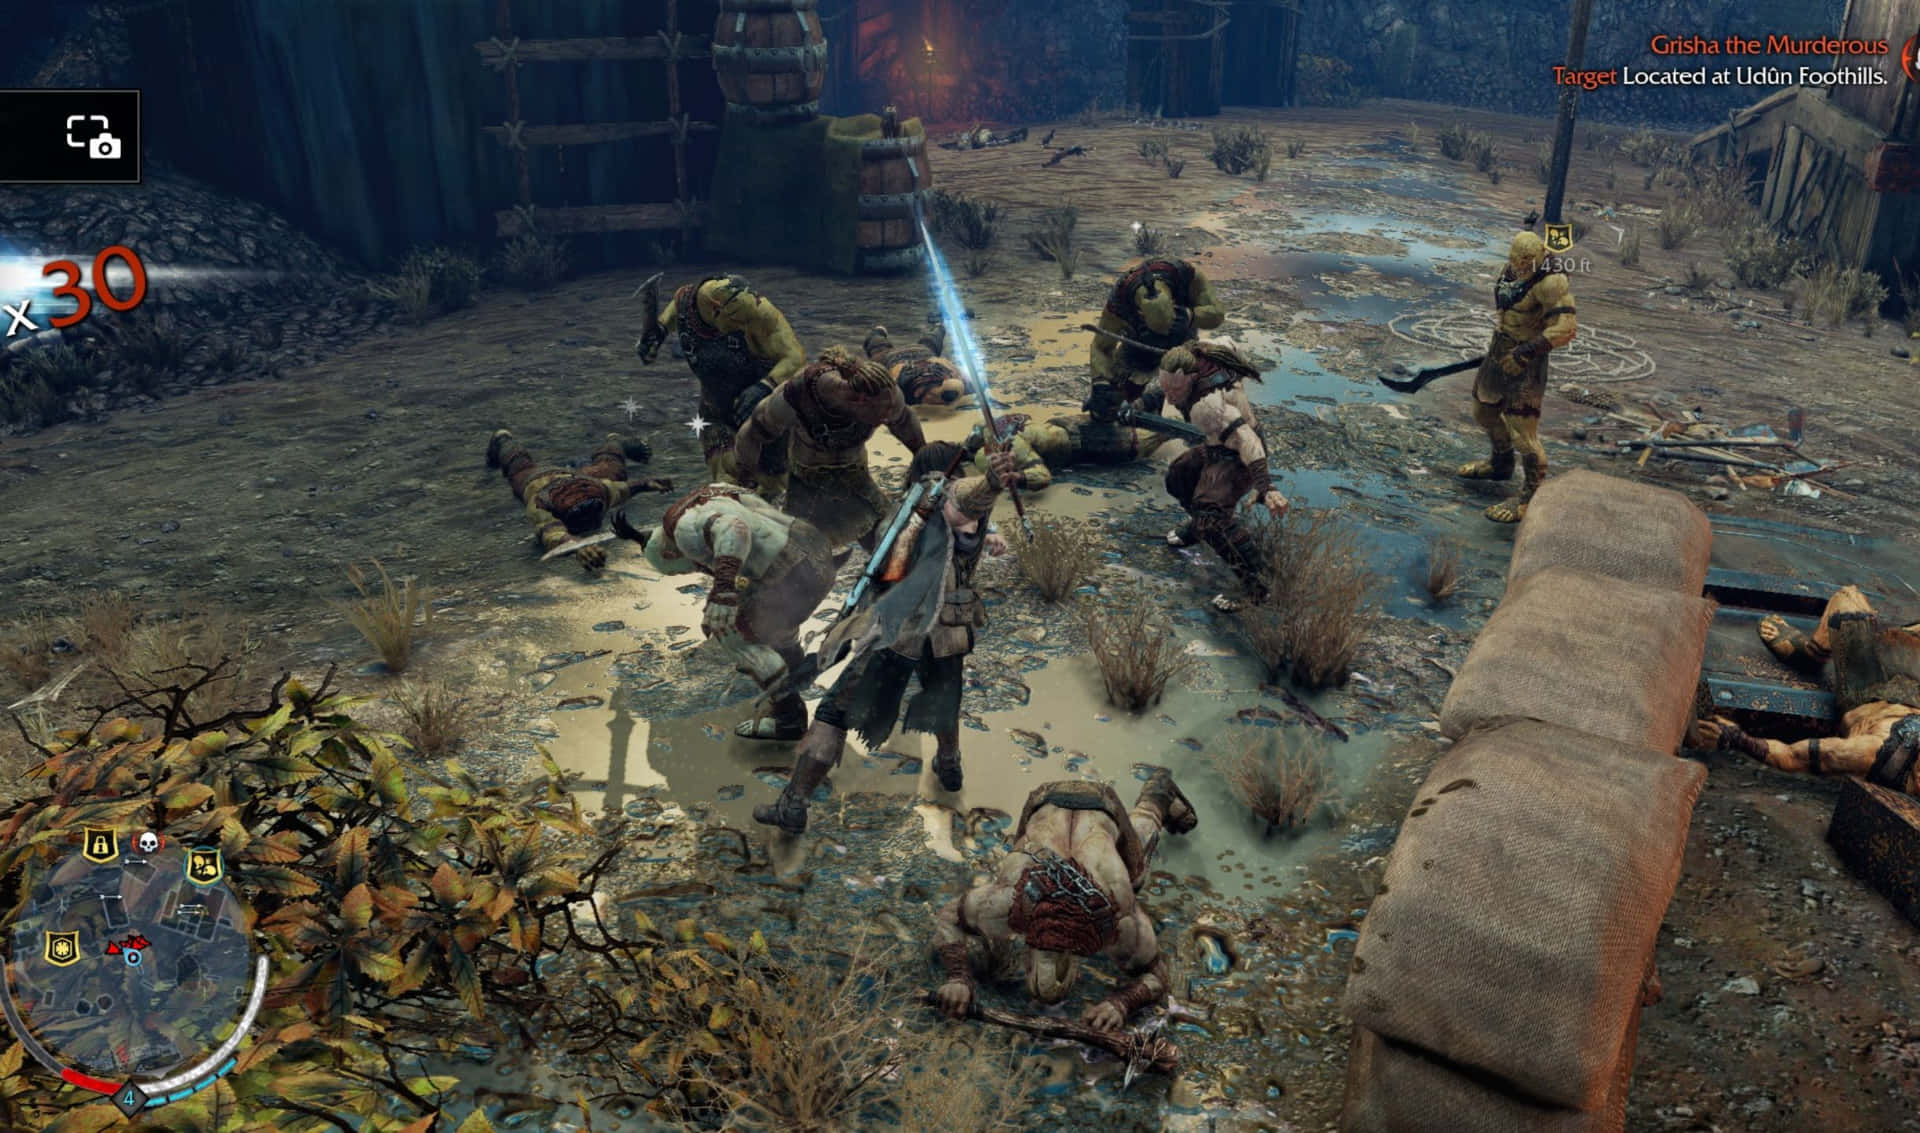 A Screenshot Of A Video Game With Zombies And Other Enemies